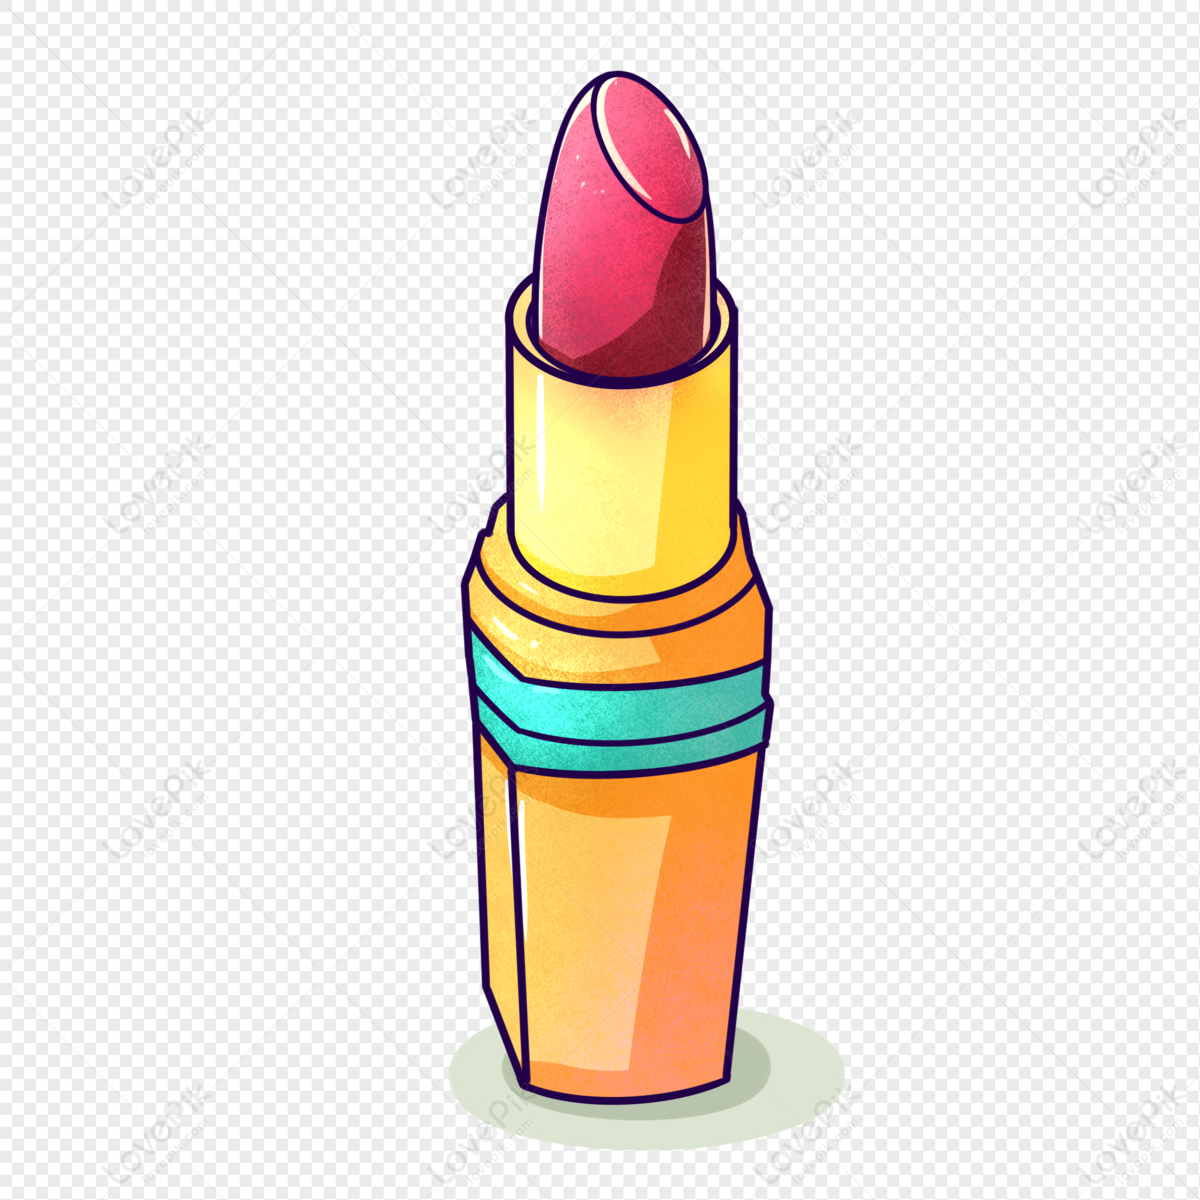 Cartoon Lipstick Picture PNG Image And Clipart Image For Free Download -  Lovepik | 401571478